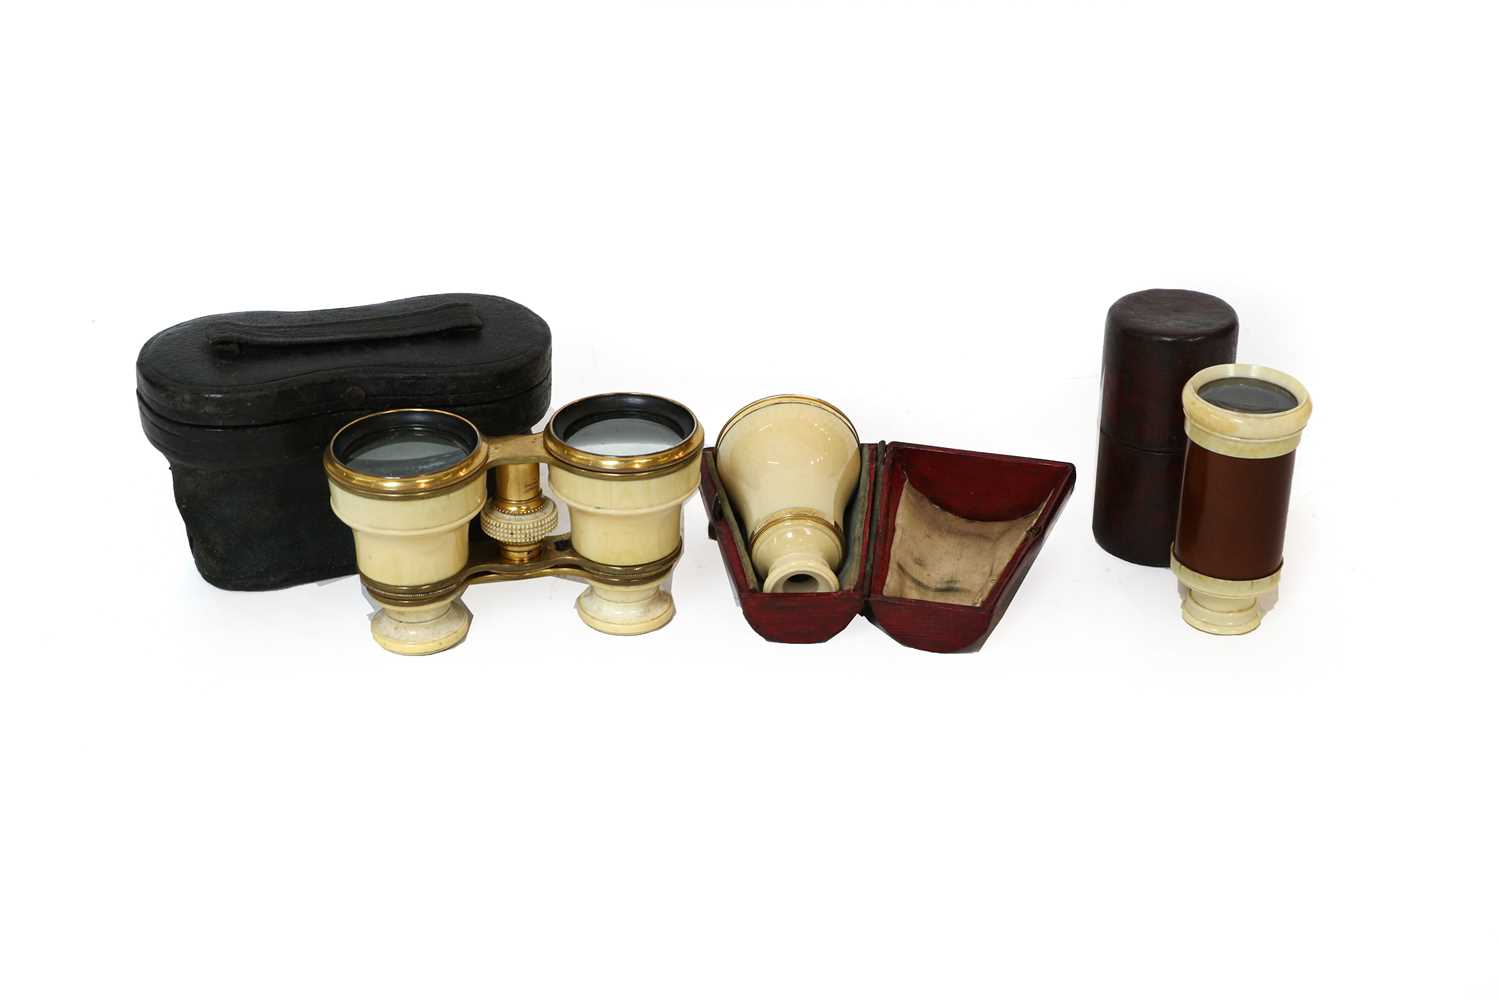 A 19th century ivory mounted monocular in fitted case maker Smith,Royal Exchange, London; together